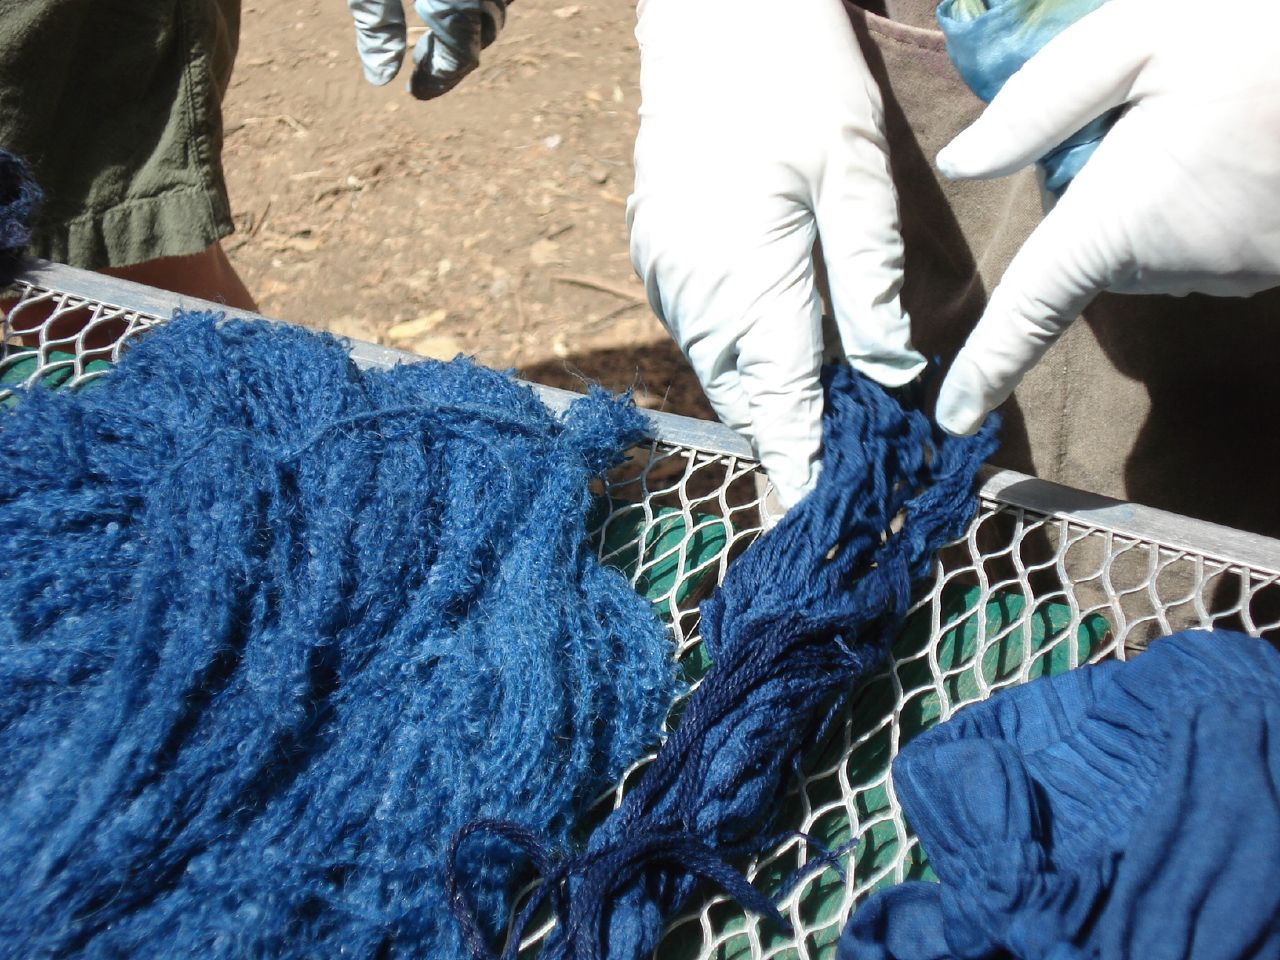 The dye of indigo plant is blue, as can be seen here on this dyed wool.